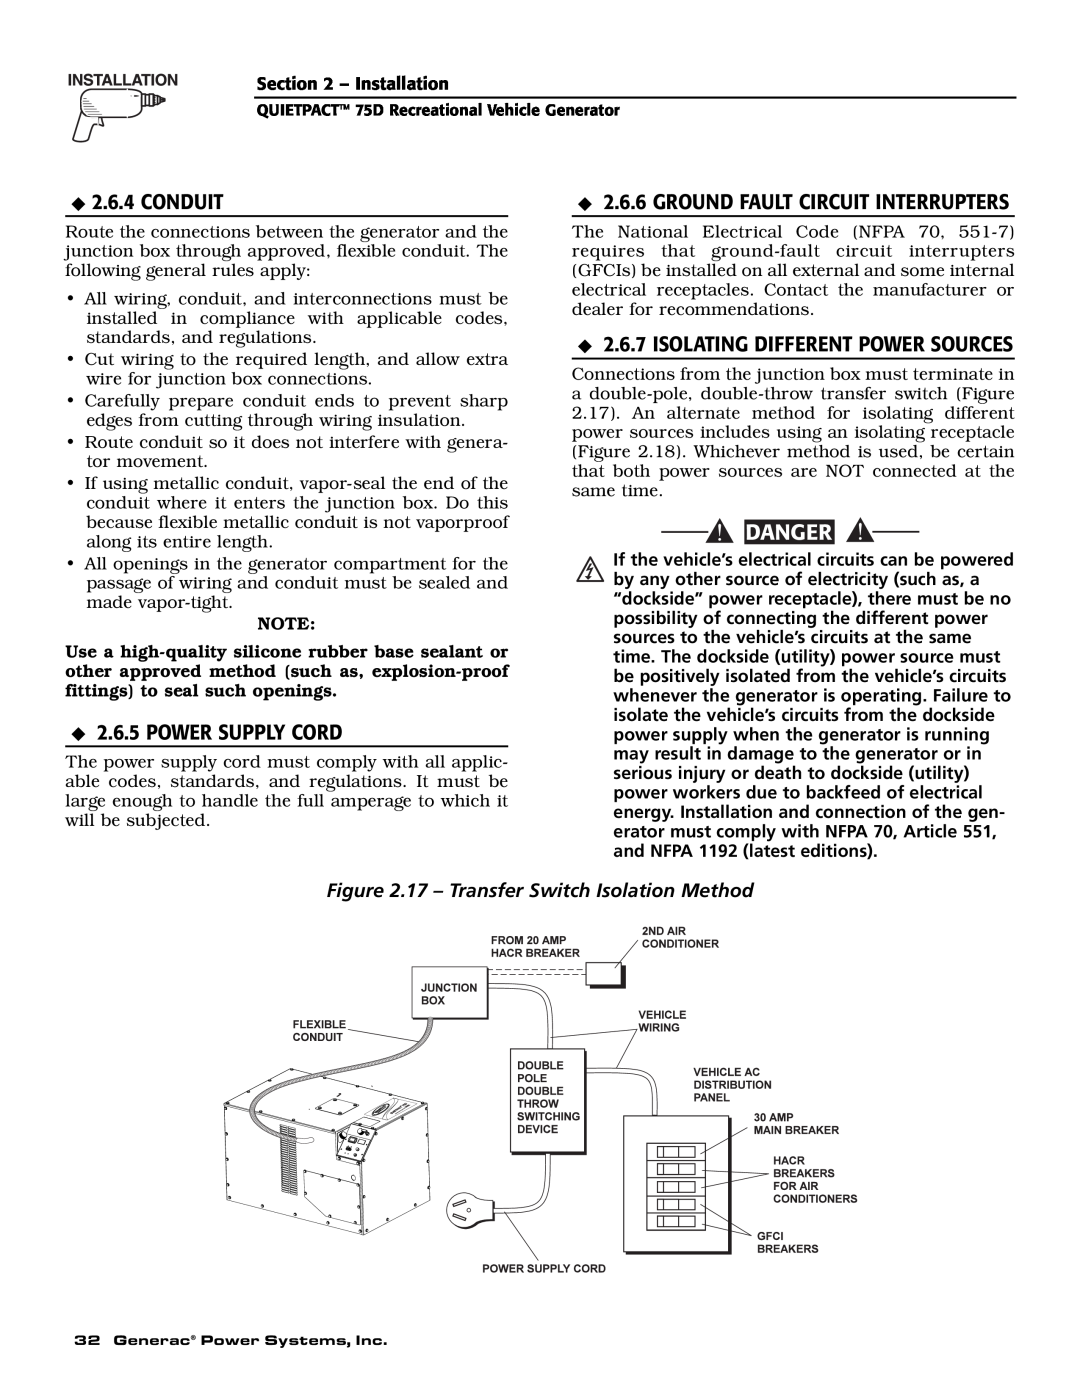 Guardian Technologies 004270-2 owner manual Conduit, Power Supply Cord, Isolating Different Power Sources, Danger 